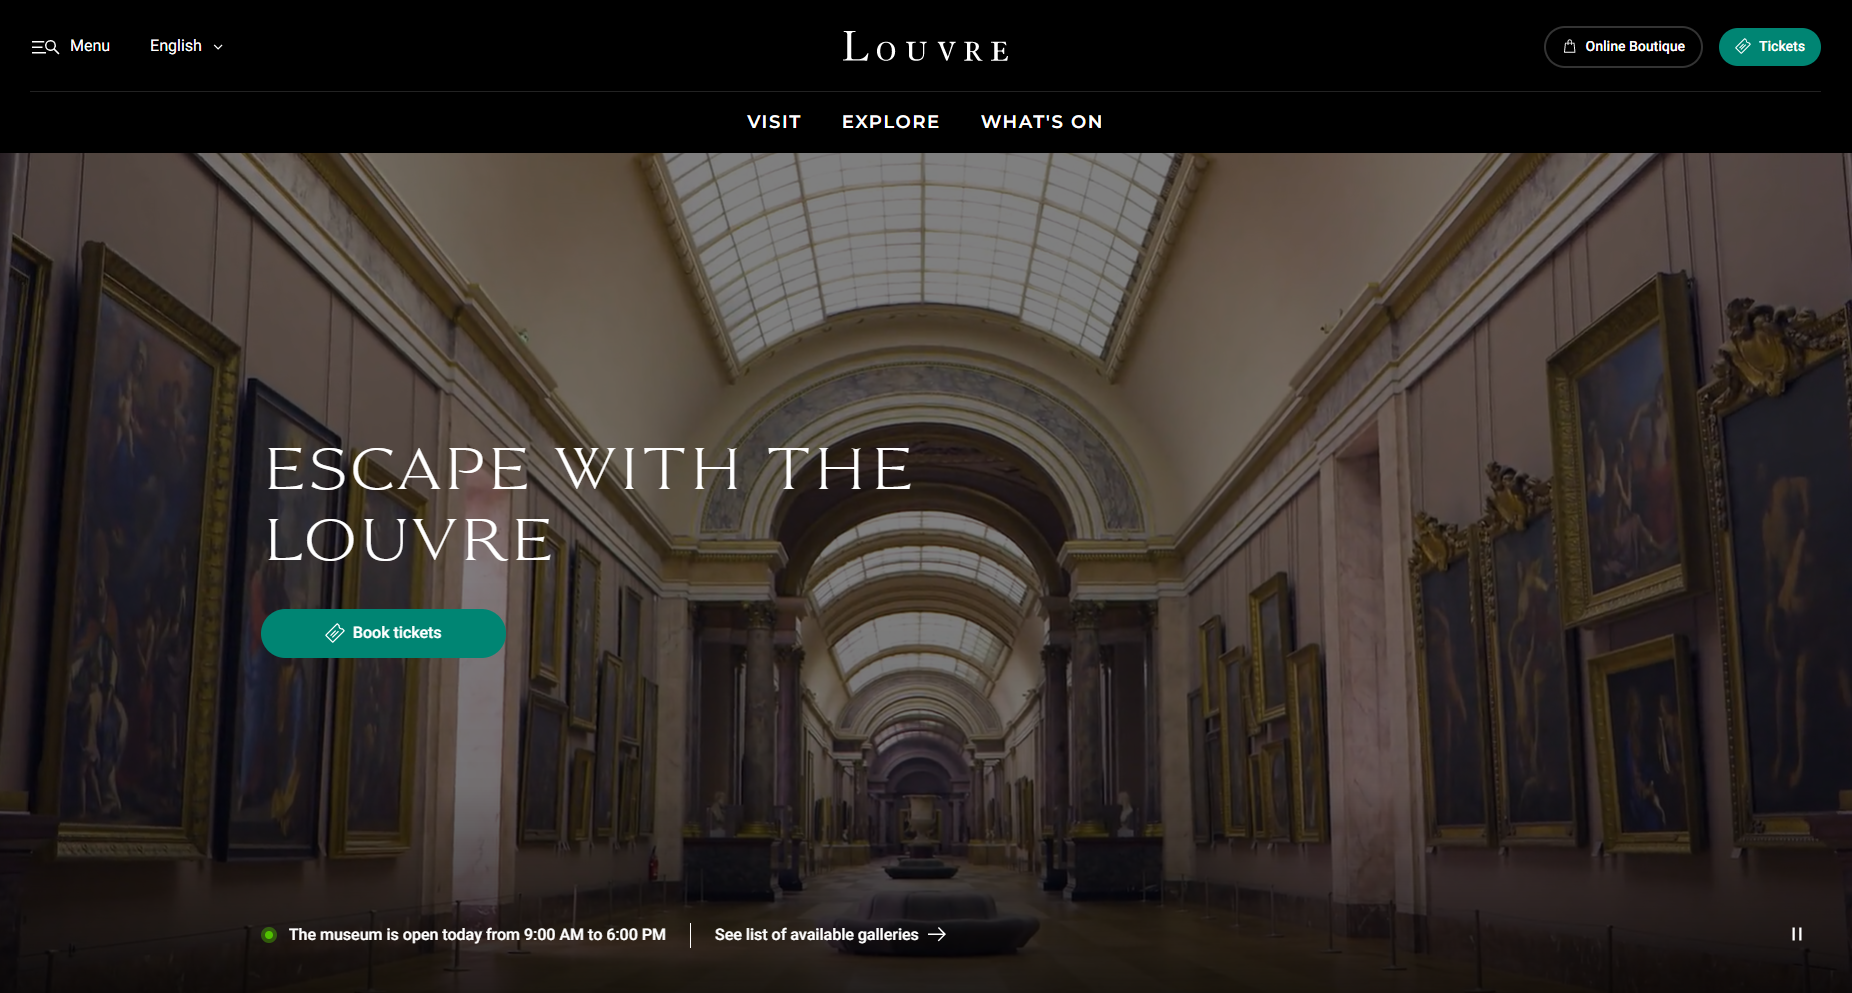 A screenshot of the Louvre homepage